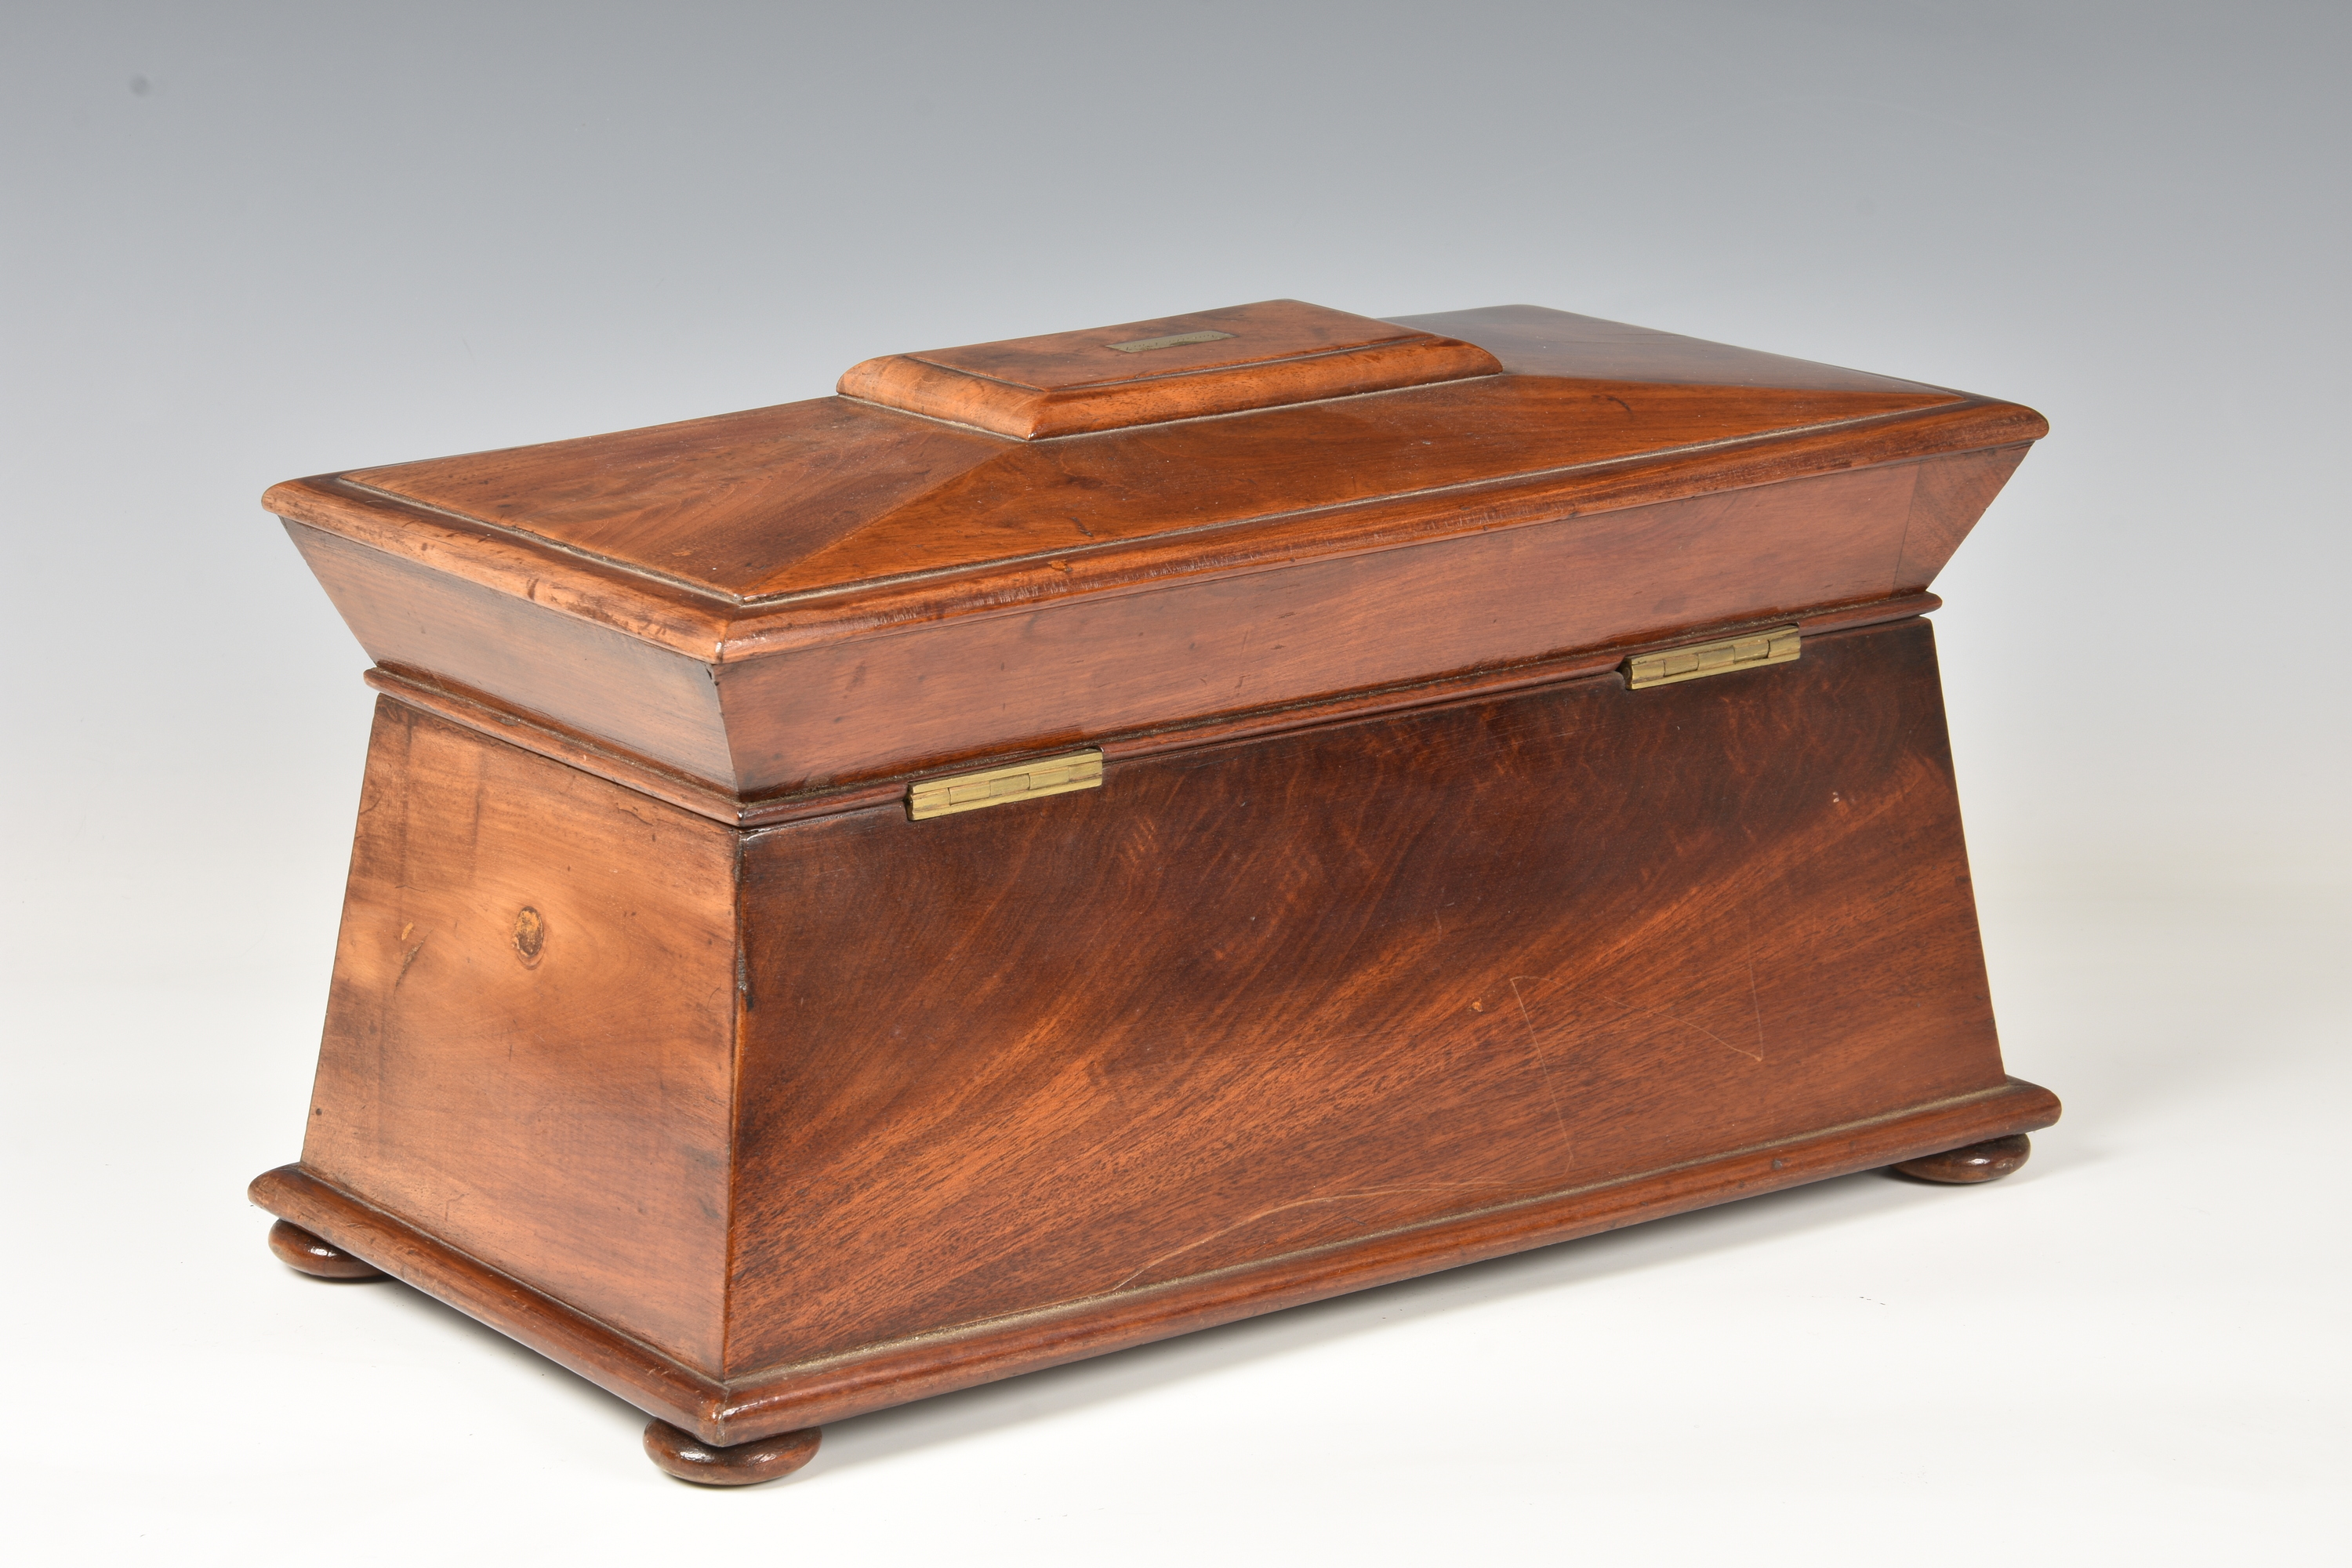 A mid-19th century mahogany tea caddy, of sarcophagus form, with VR lock plate and inlaid - Image 2 of 4